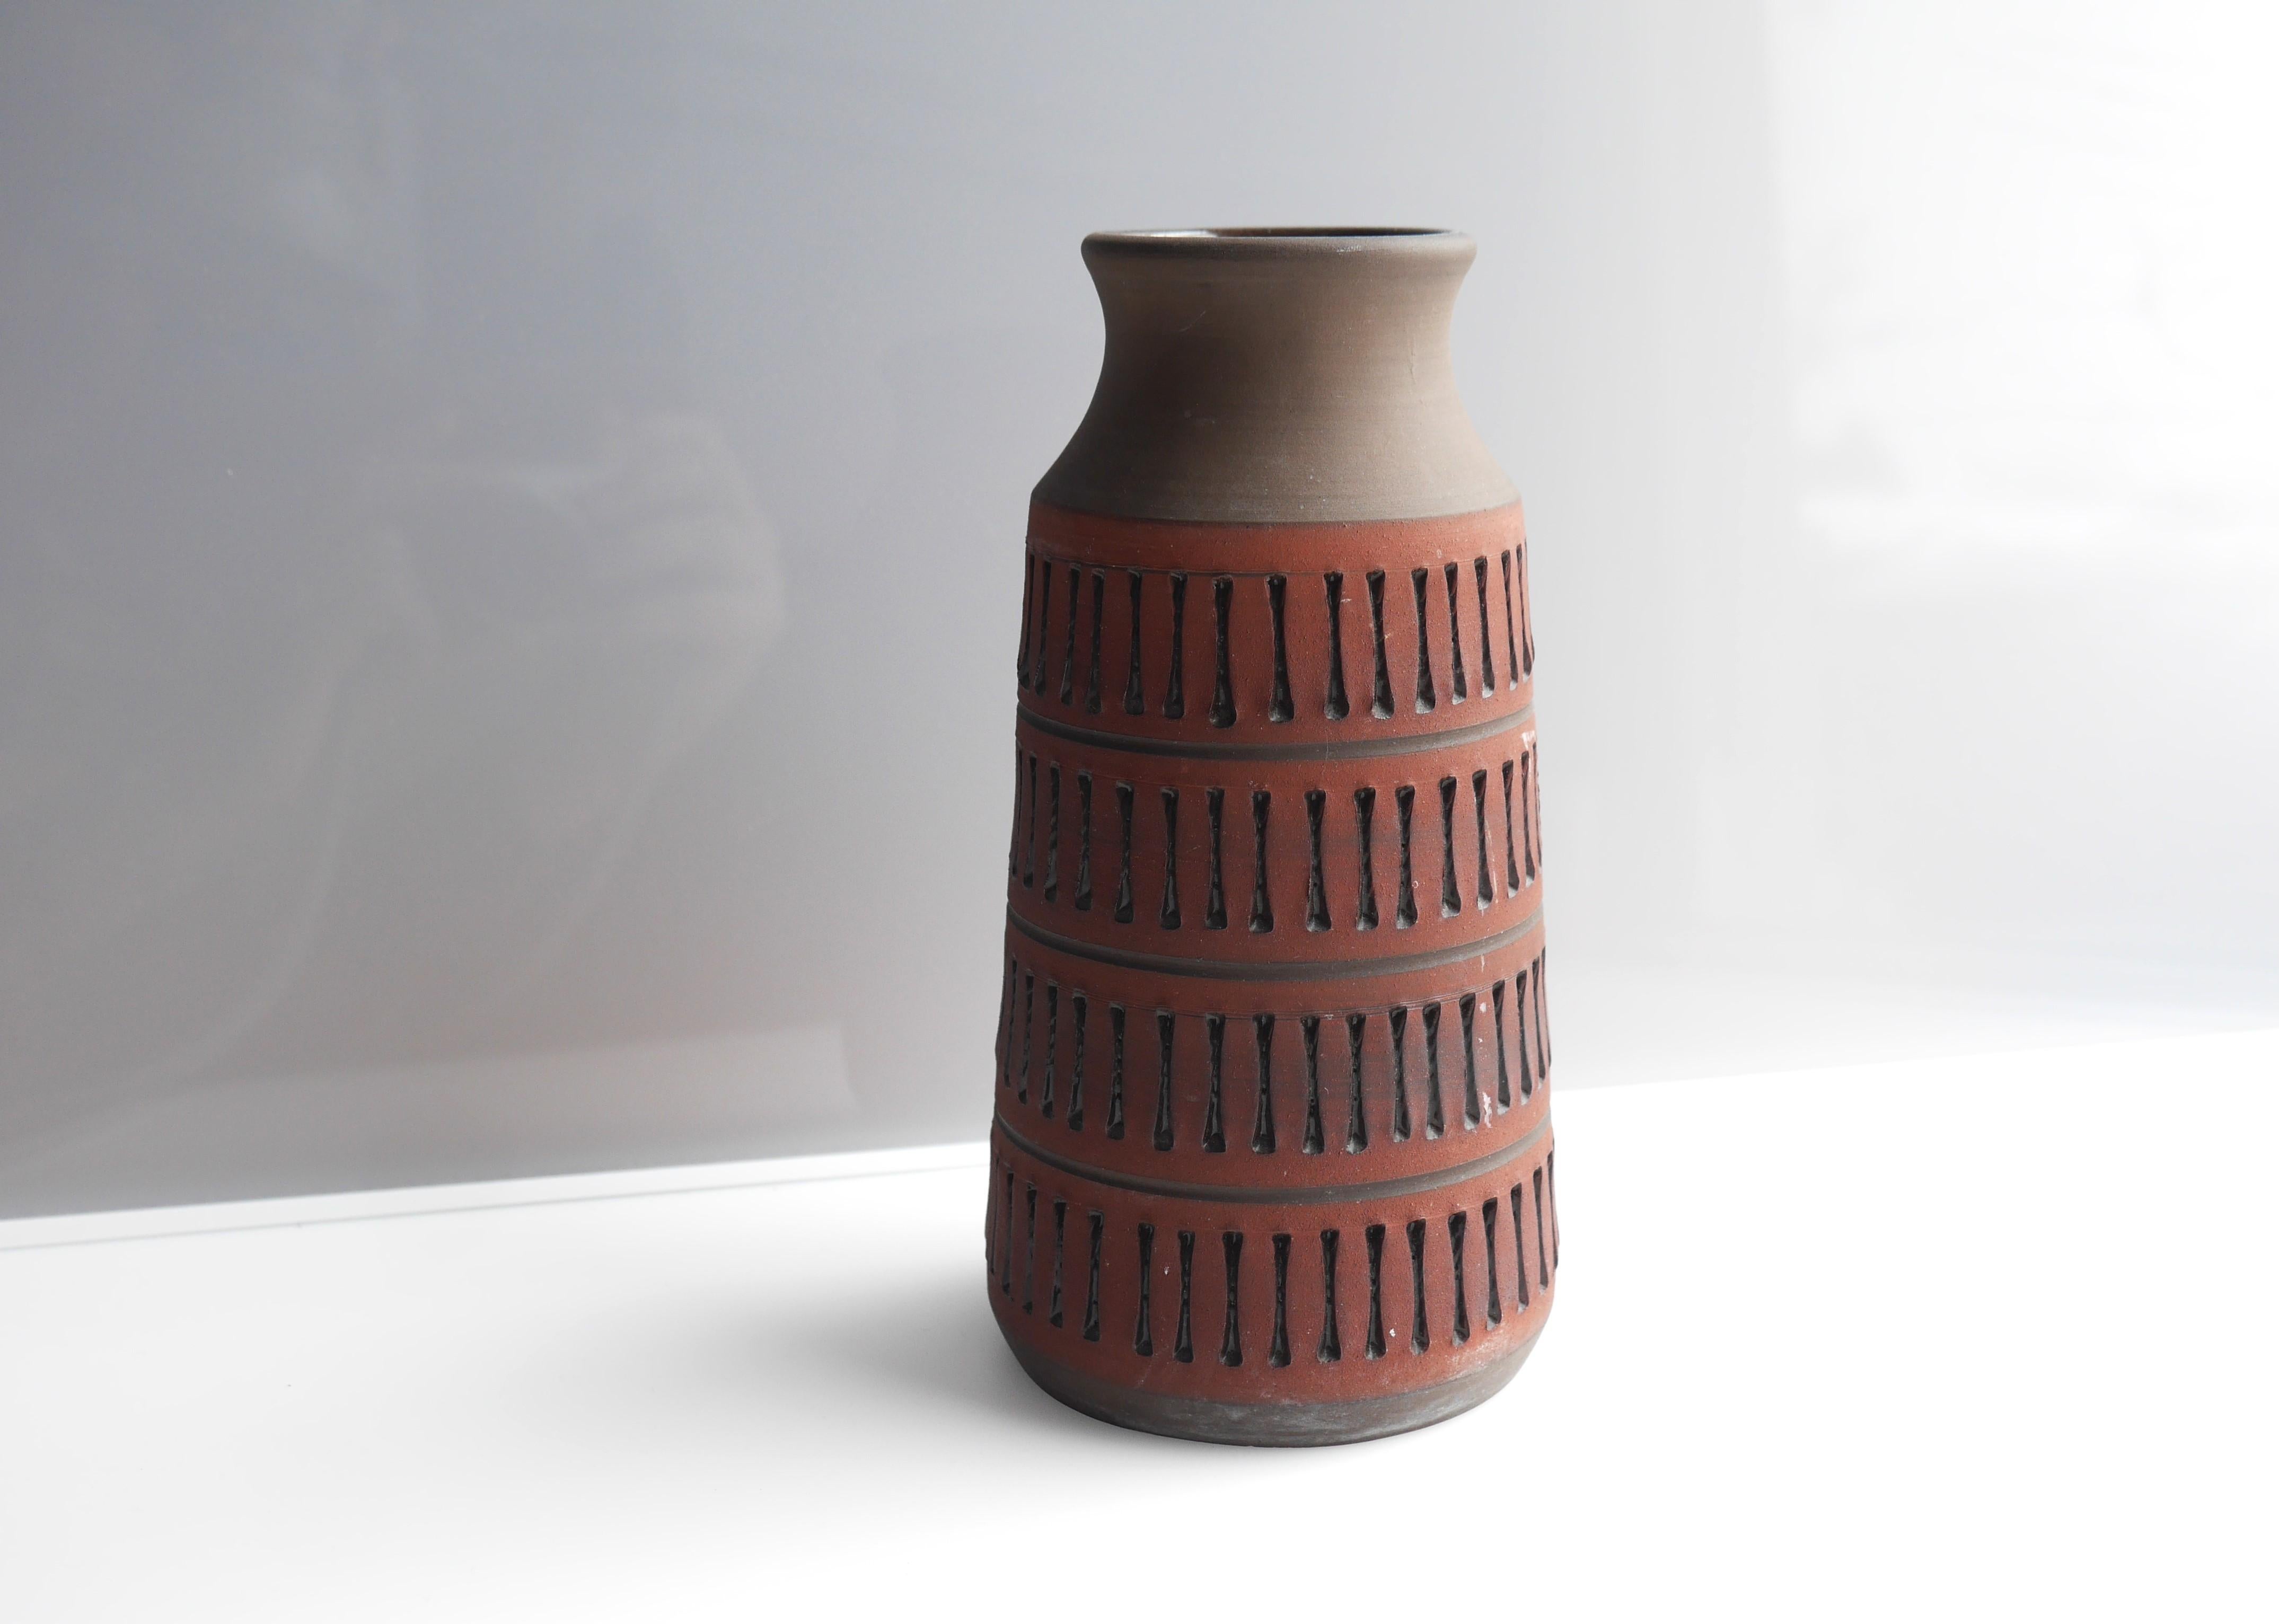 Mid-20th Century Swedish Deep Red Brutalist Art Vase, by Tomas Anagrius for Alingsås